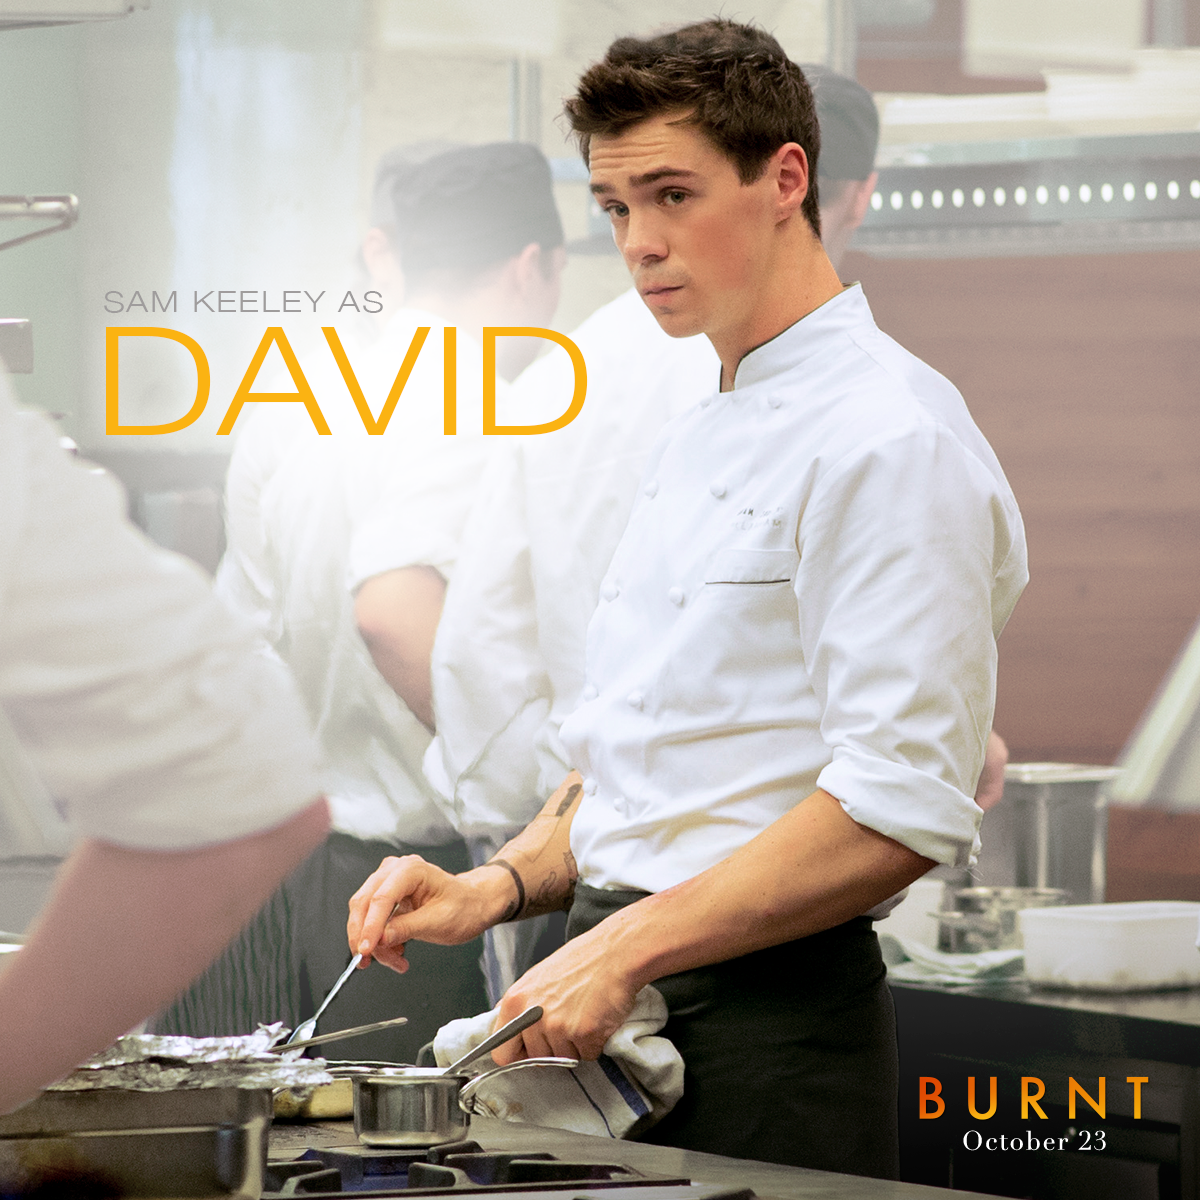 X 上的Burnt Movie：「Sam Keely takes on the role of David, the young chef who needs just a touch of arrogance to be great. #BurntMovie https://t.co/2ffyOoJu8m」 / X